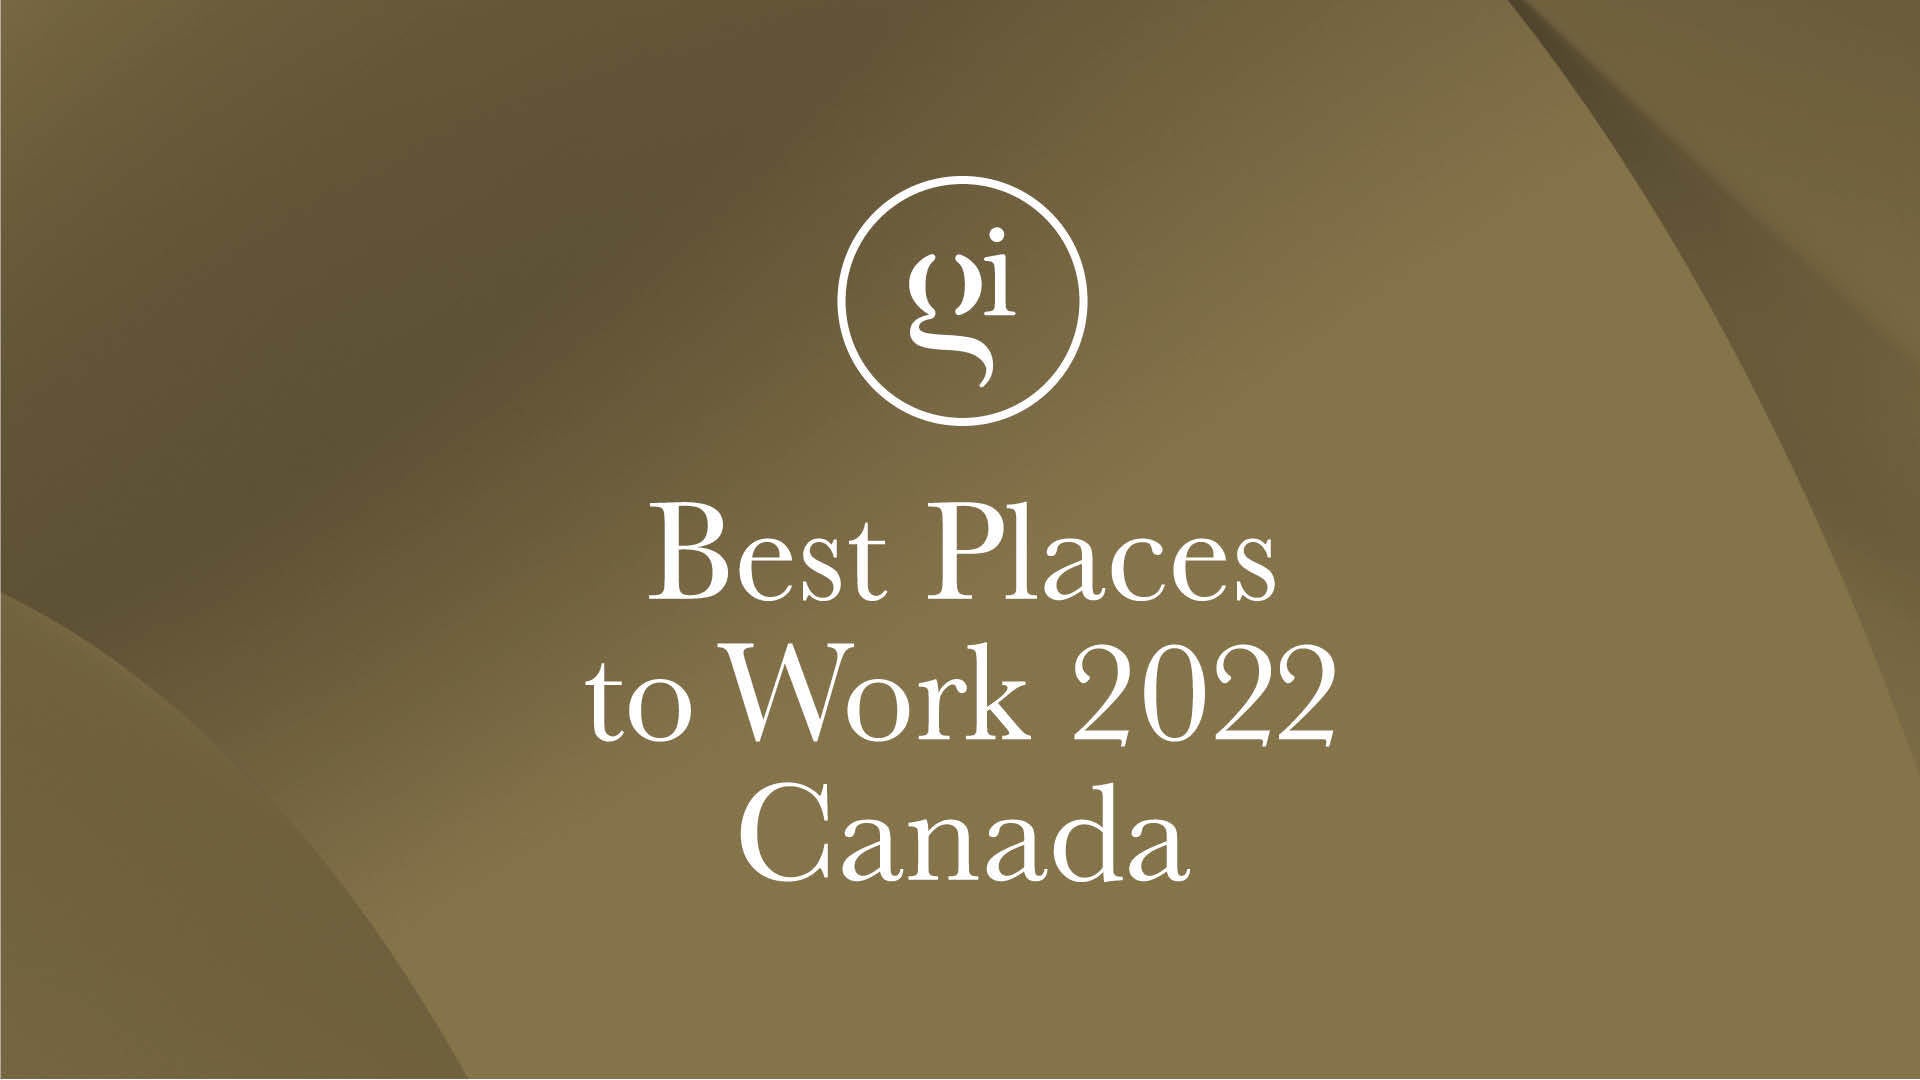 Image for Two weeks remaining to enter Best Places To Work Awards Canada